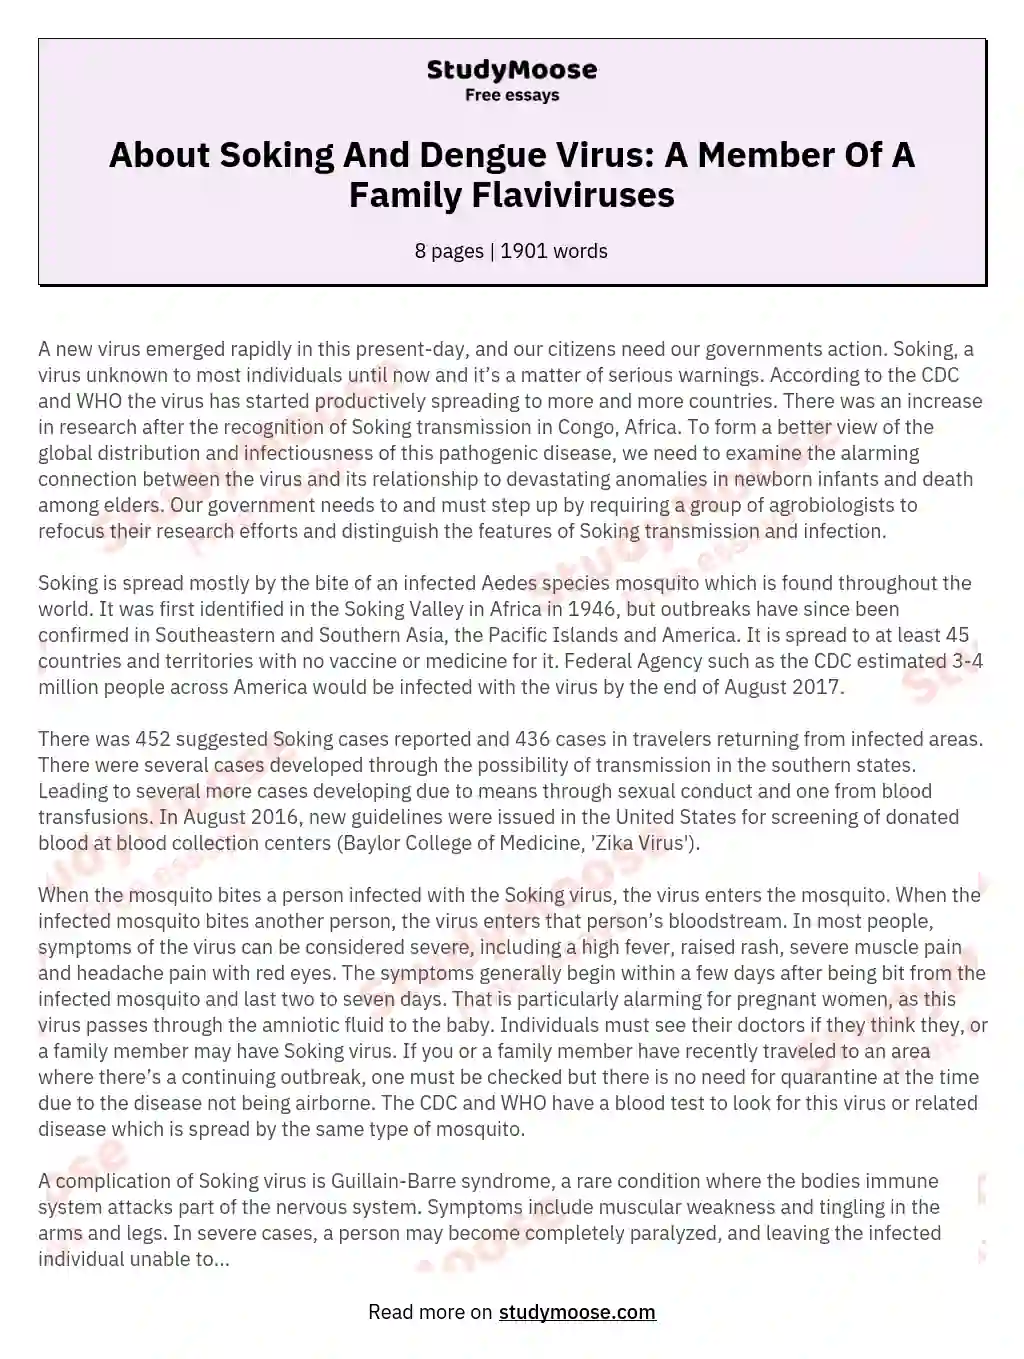 About Soking And Dengue Virus: A Member Of A Family Flaviviruses essay